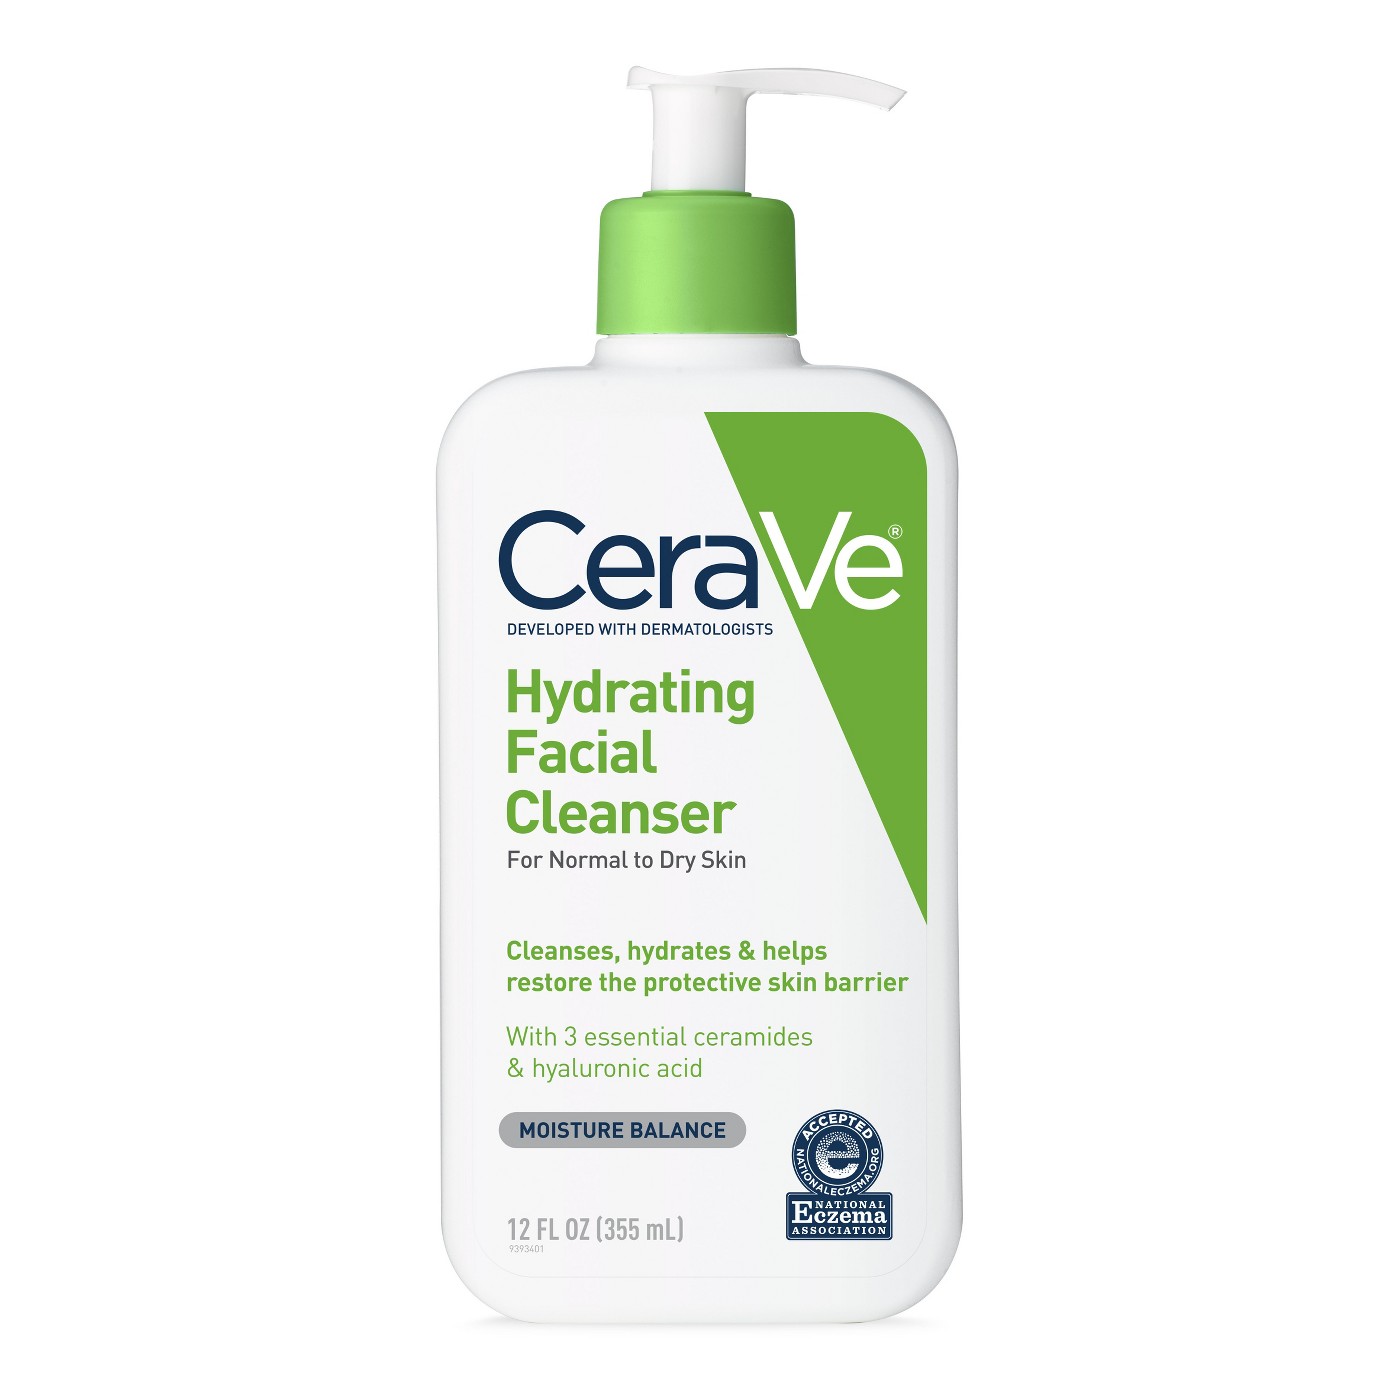 CeraVe Hydrating Facial Cleanser ($11)